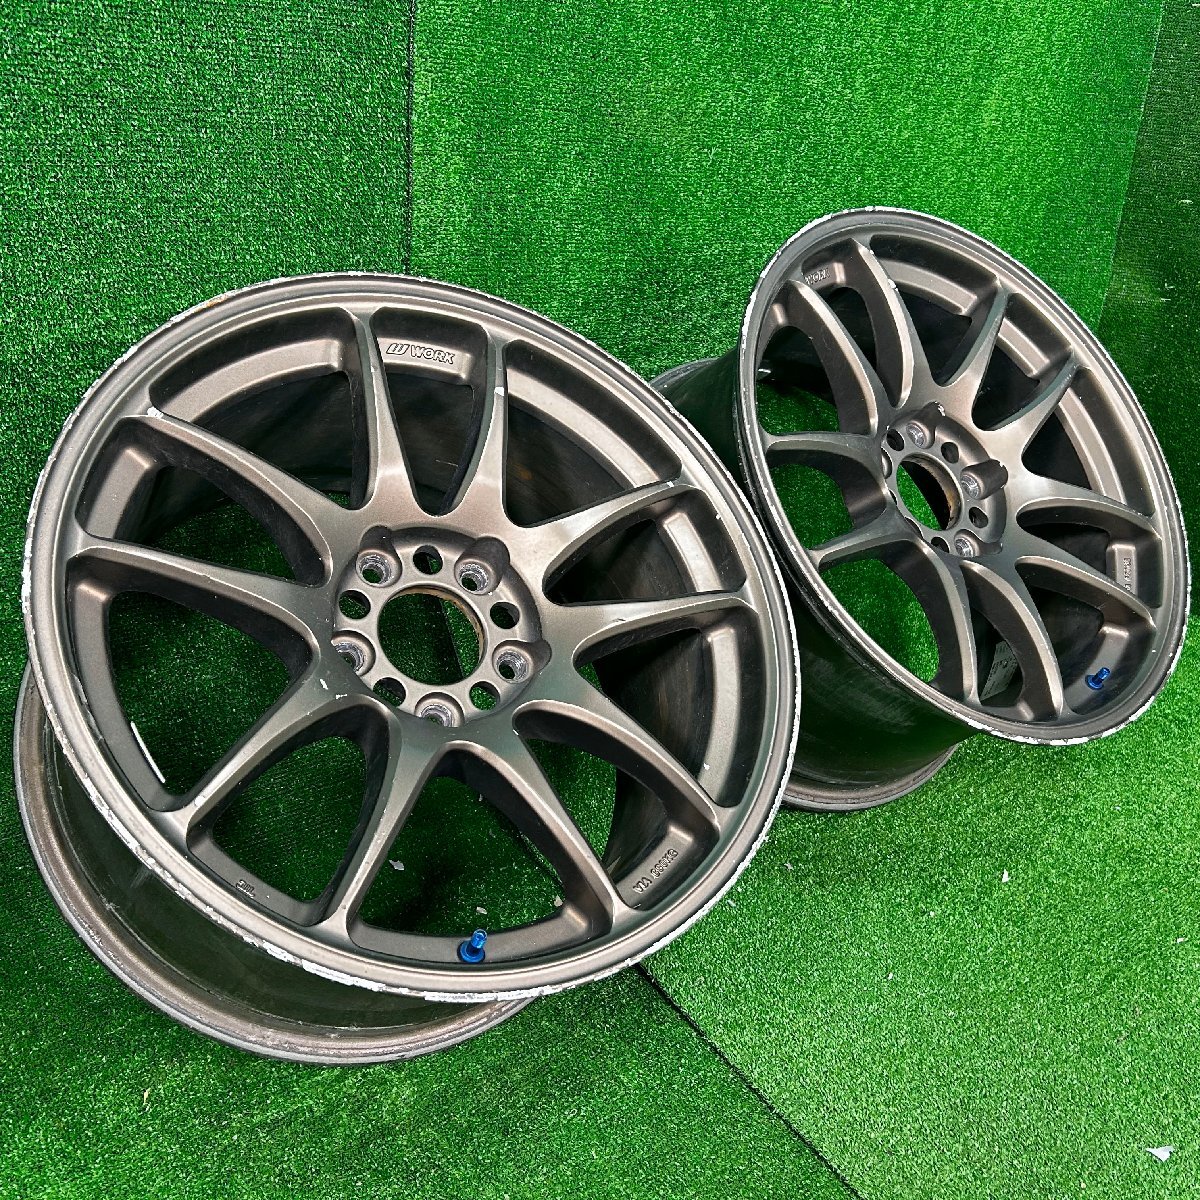 17×9j 5h ＋44 114.3 WORK EMOTION CR KAI ワーク エモーション 希少 アルミ ホイール ホイル 17 インチ in 5穴 pcd 2本 菅17-271の画像1